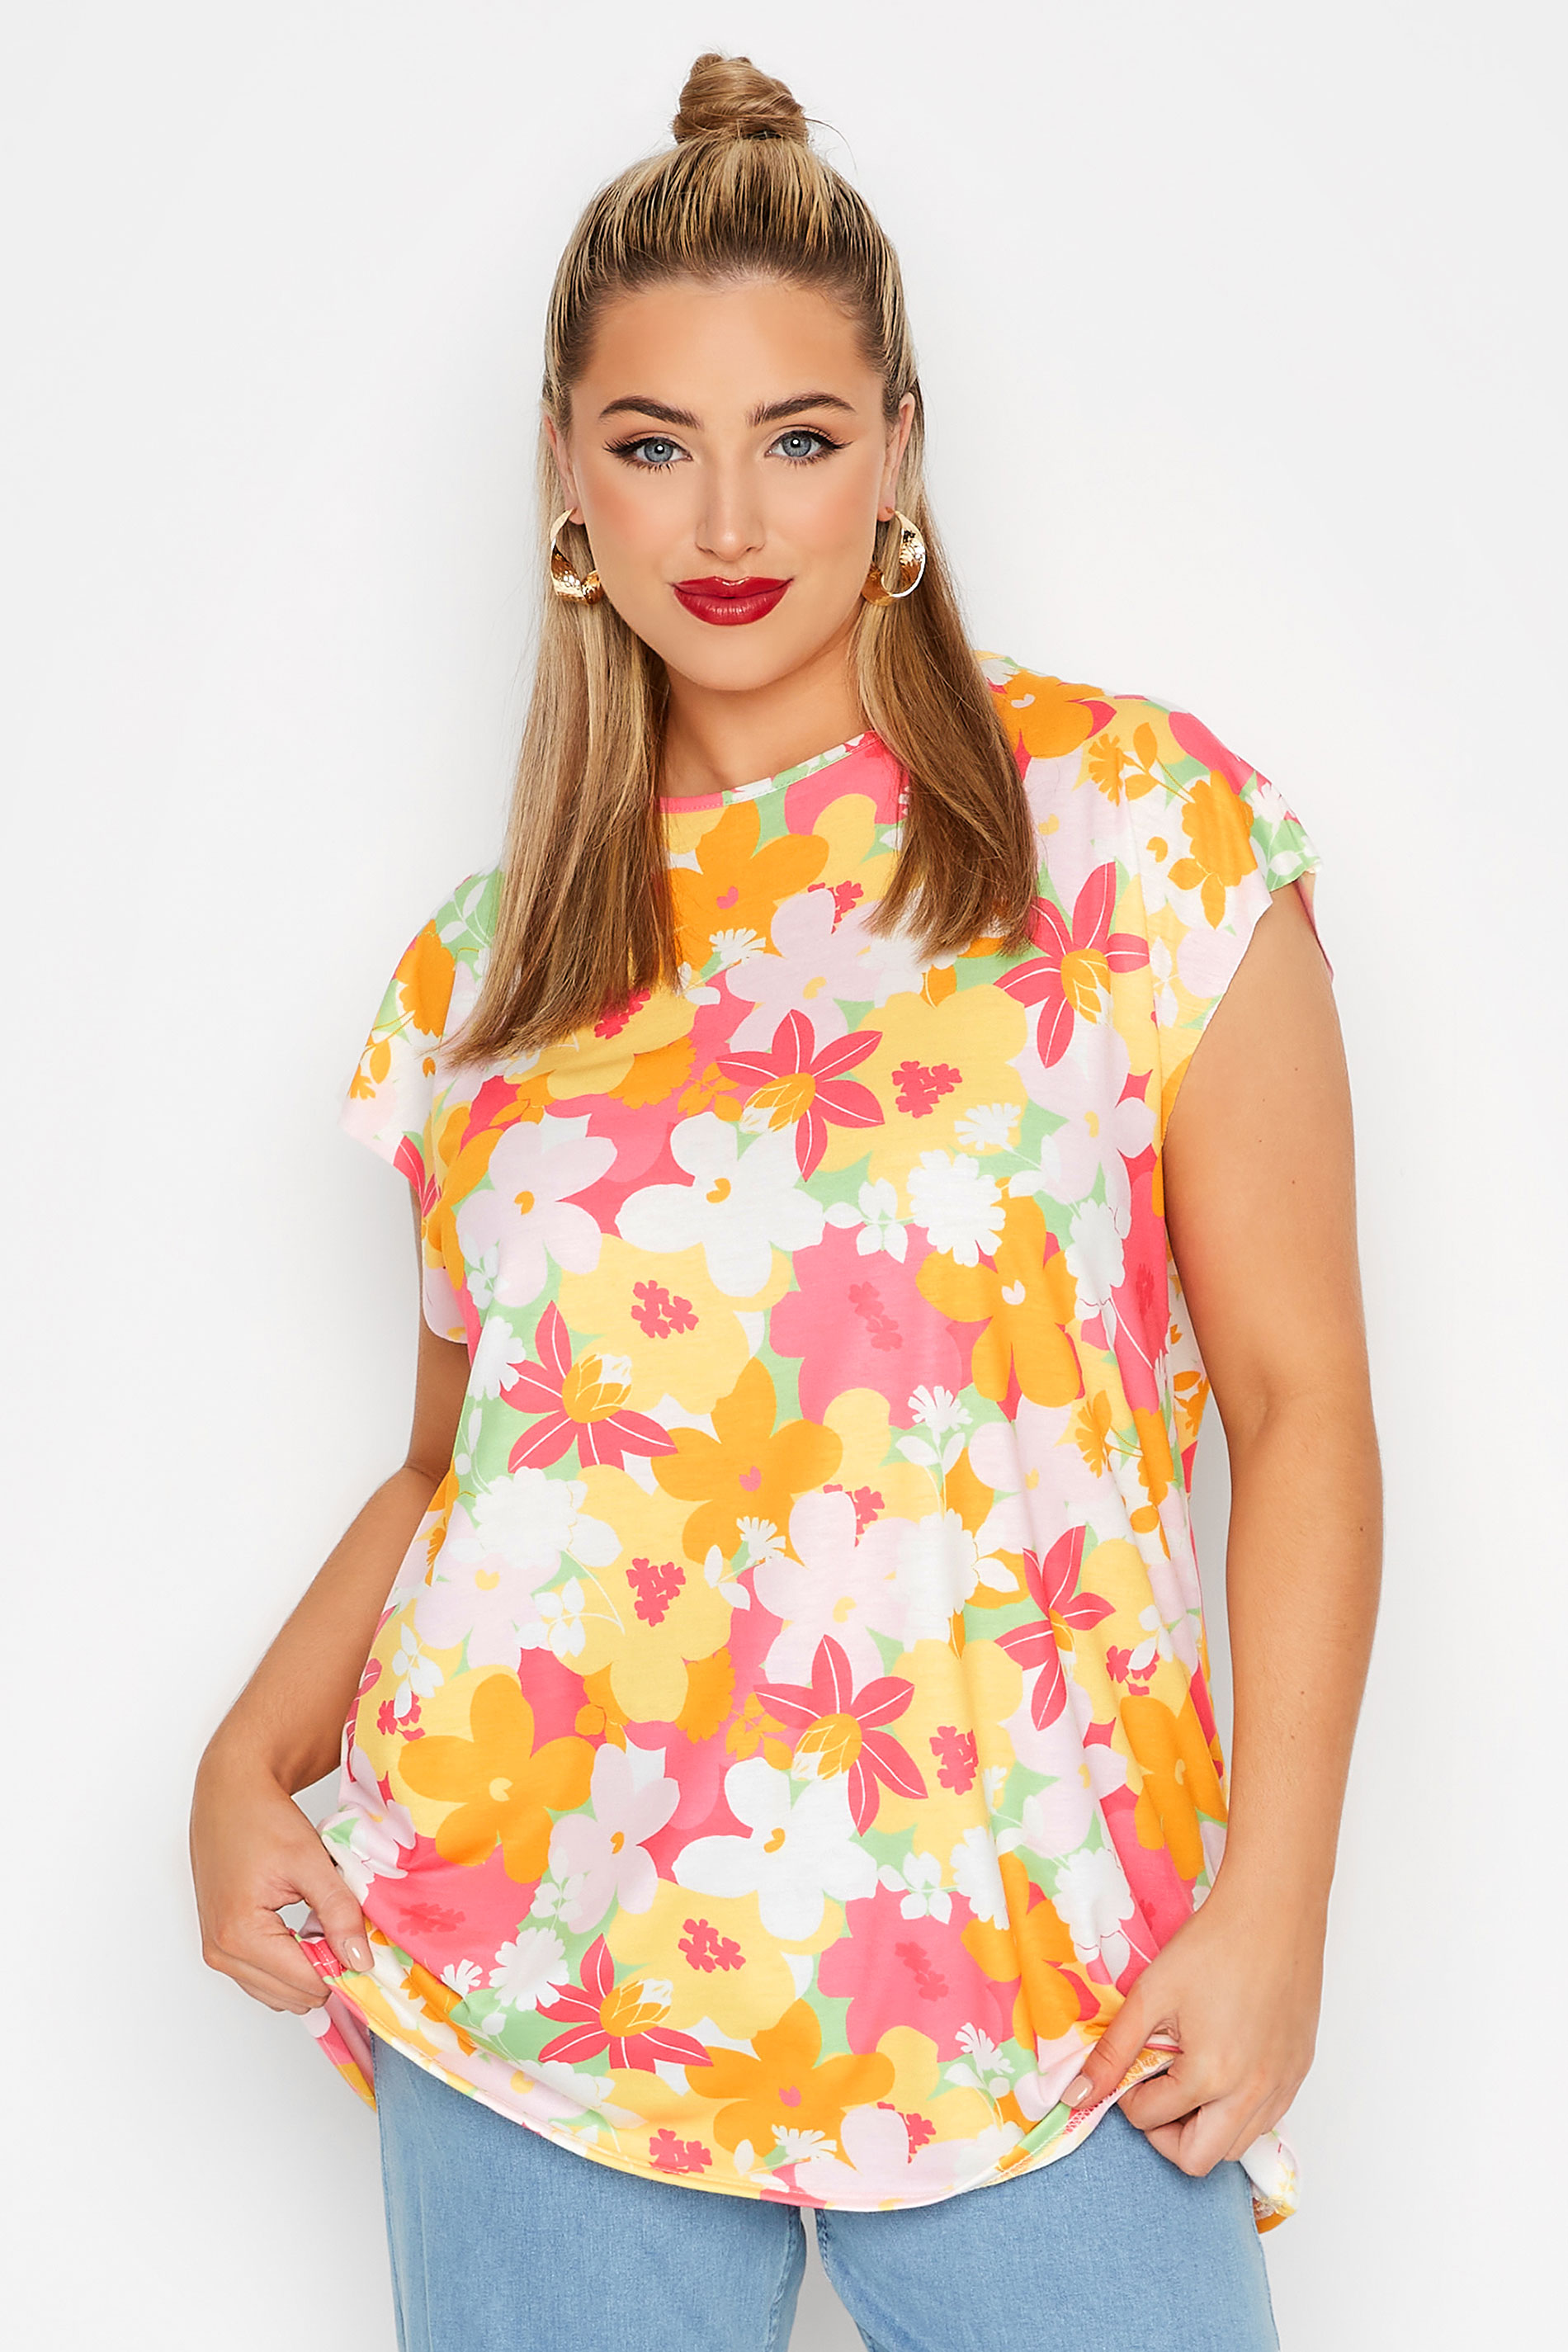 Grande taille  Tops Grande taille  Tops Jersey | LIMITED COLLECTION - T-Shirt Rétro Rose en Floral - QN15013